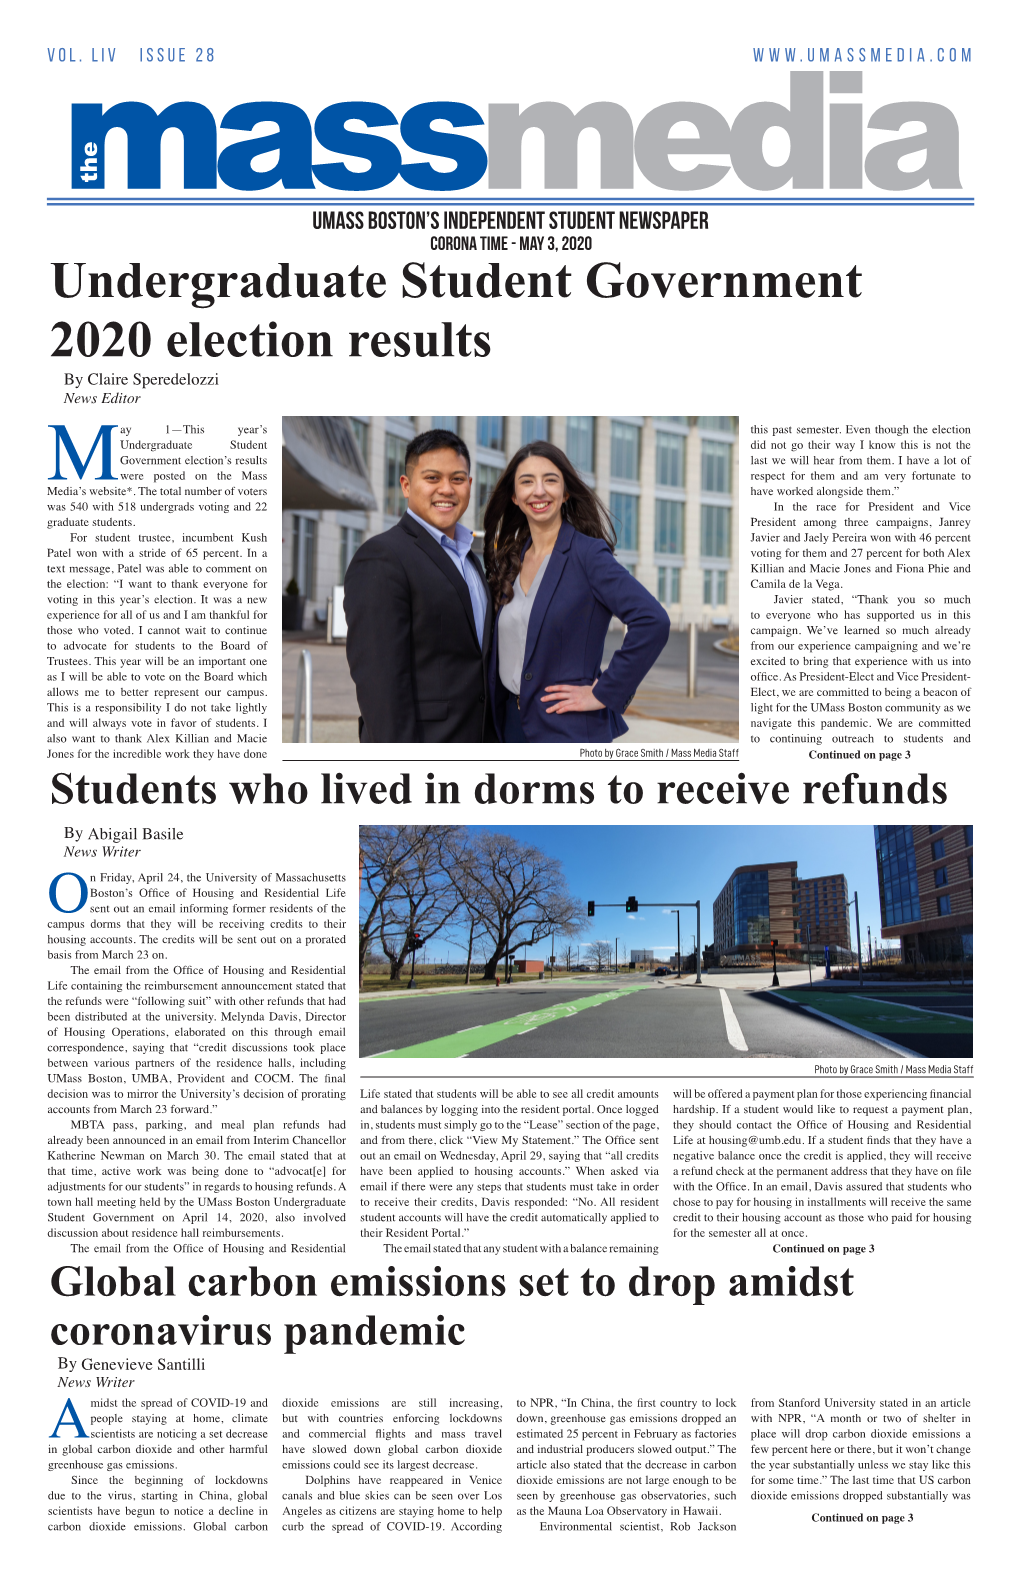 Undergraduate Student Government 2020 Election Results by Claire Speredelozzi News Editor